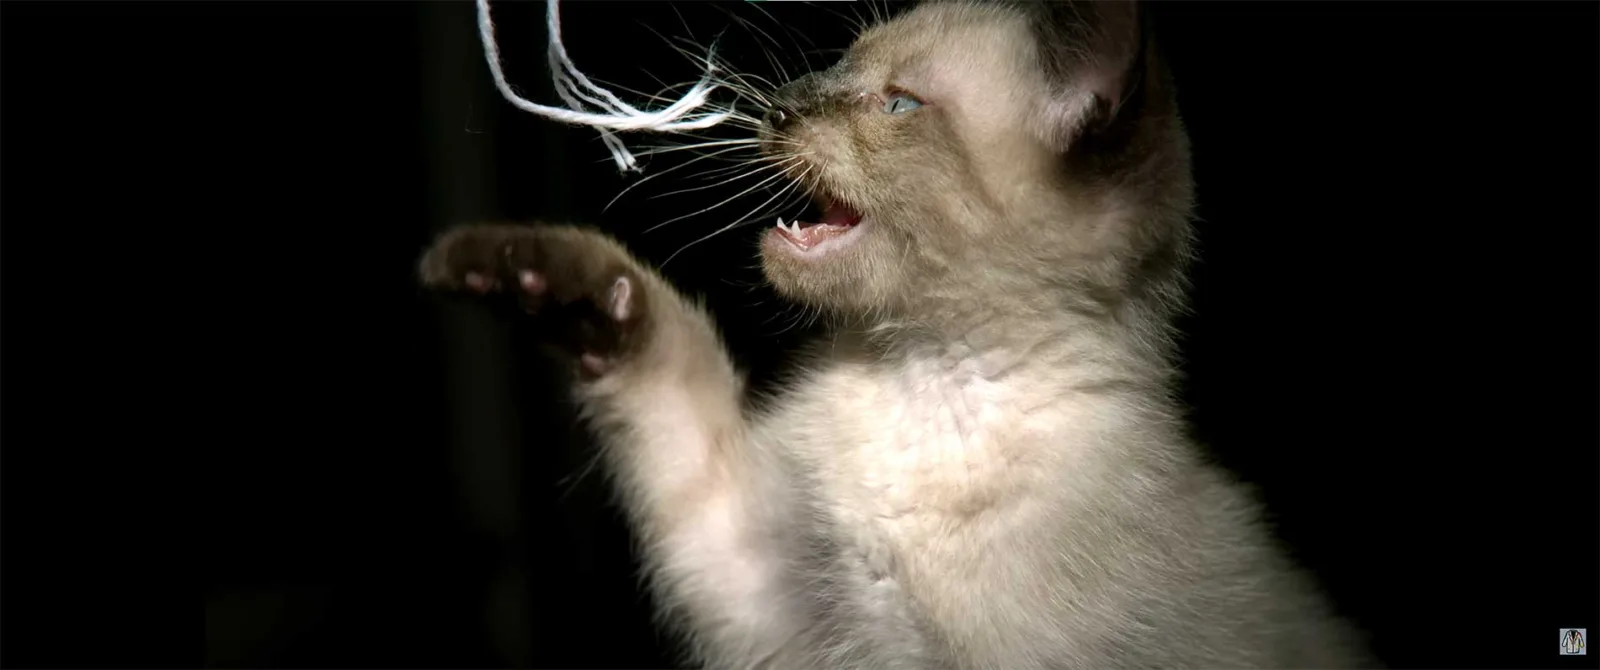 An action shot of a kitten in mid-play, its mouth open as it reaches for a floating white string. The focus is on the kitten's face, especially its whiskers, which are spread forward, touching the string.